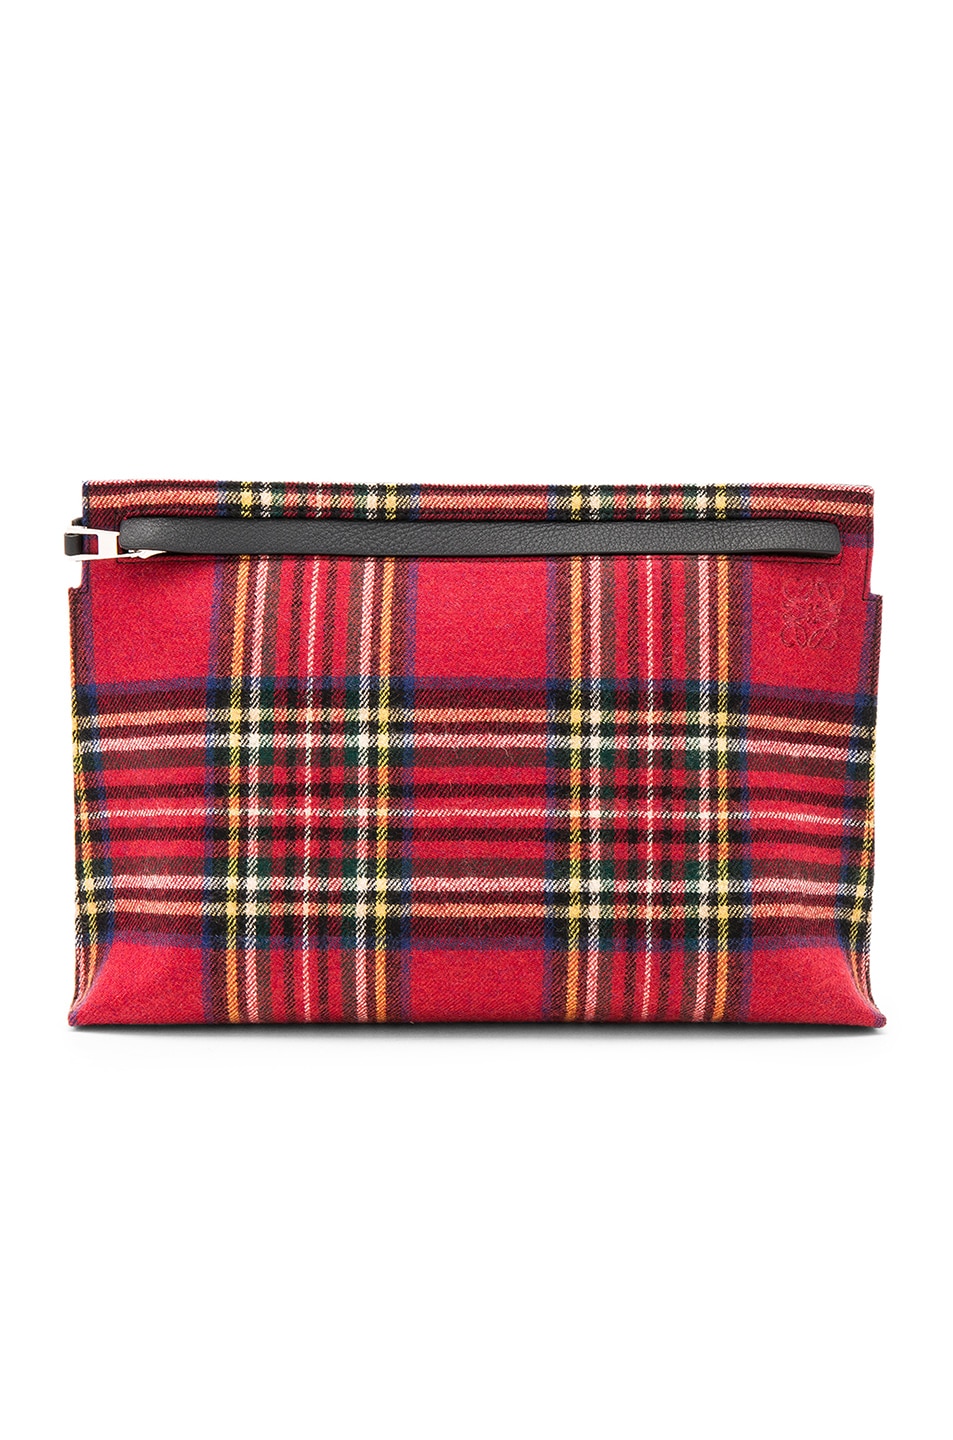 Image 1 of Loewe Pouch in Red Tartan